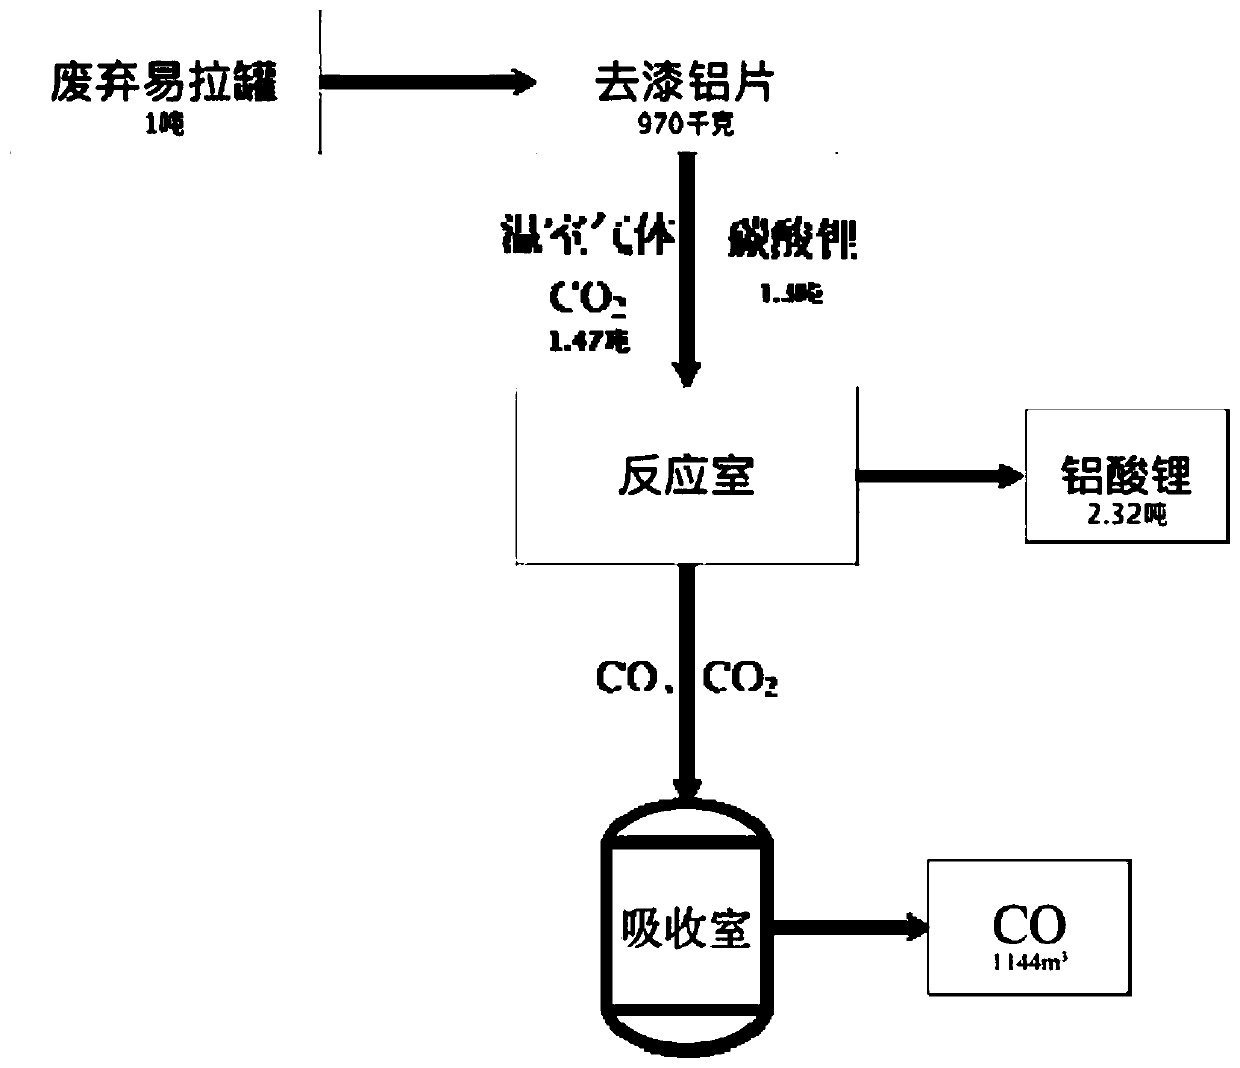 Waste aluminum recycling method